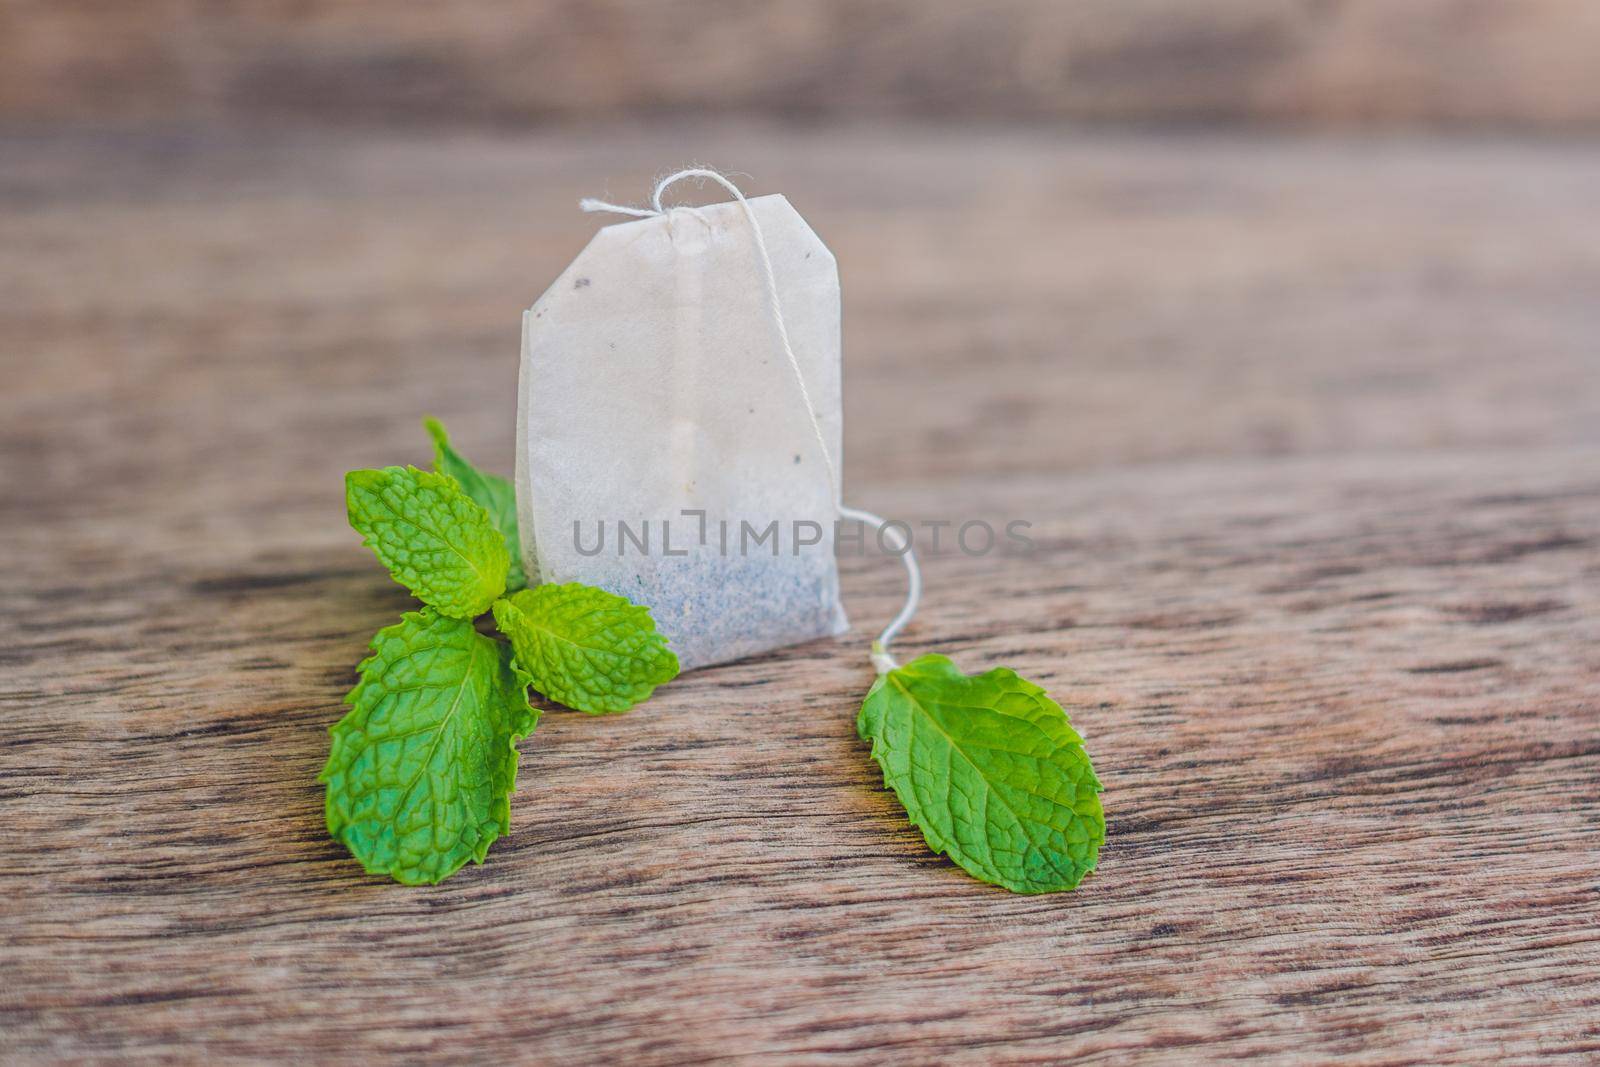 Tea bags on wooden background with fresh melissa, mint. Tea with mint concept.